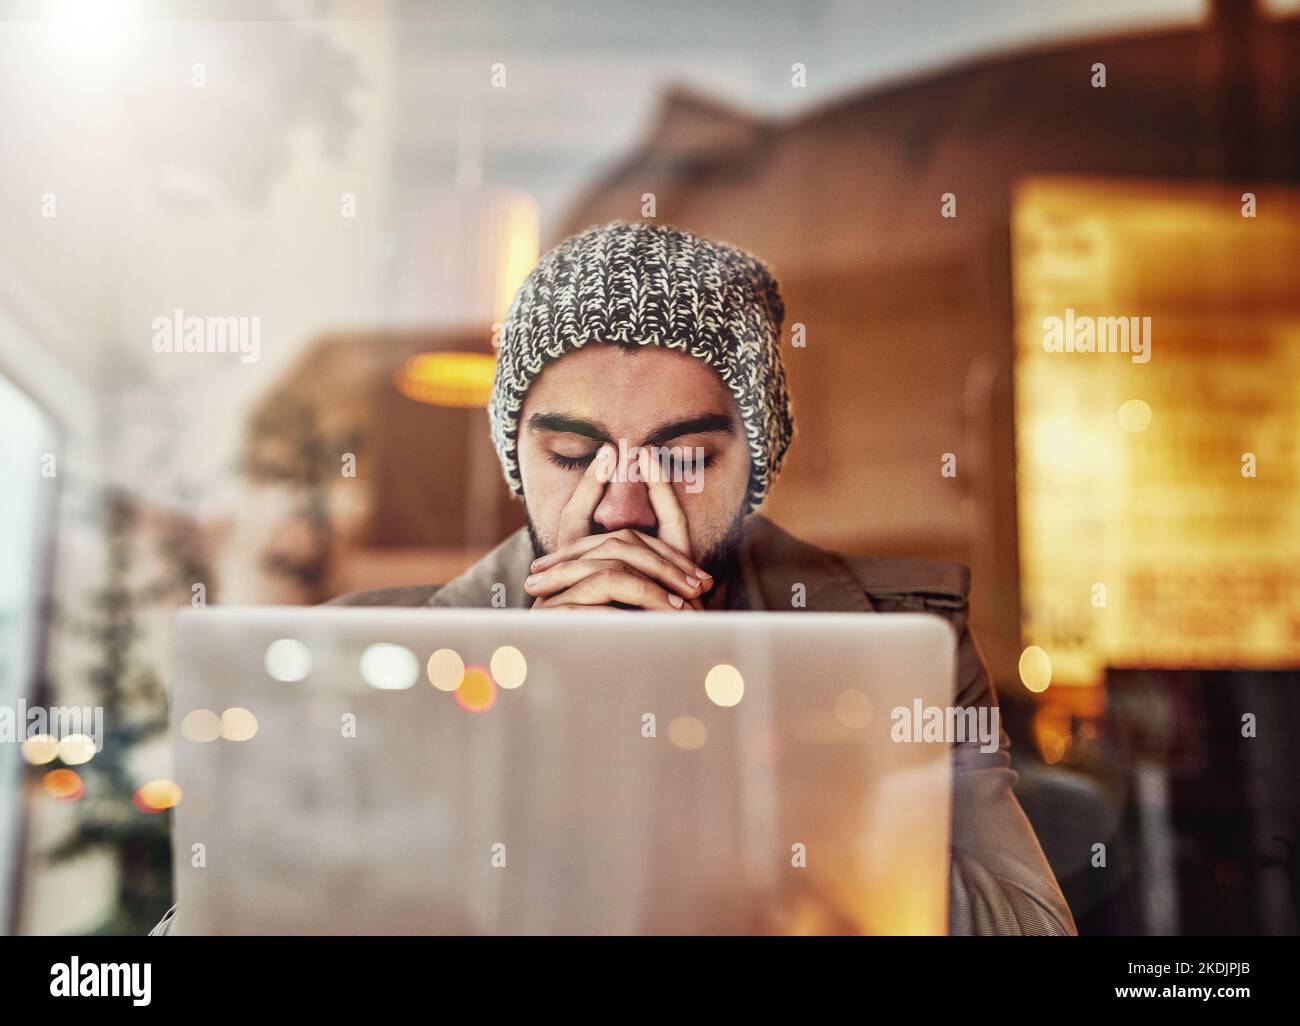 Why didnt I backup my files...a young man looking stressed while using a laptop in a cafe. Stock Photo